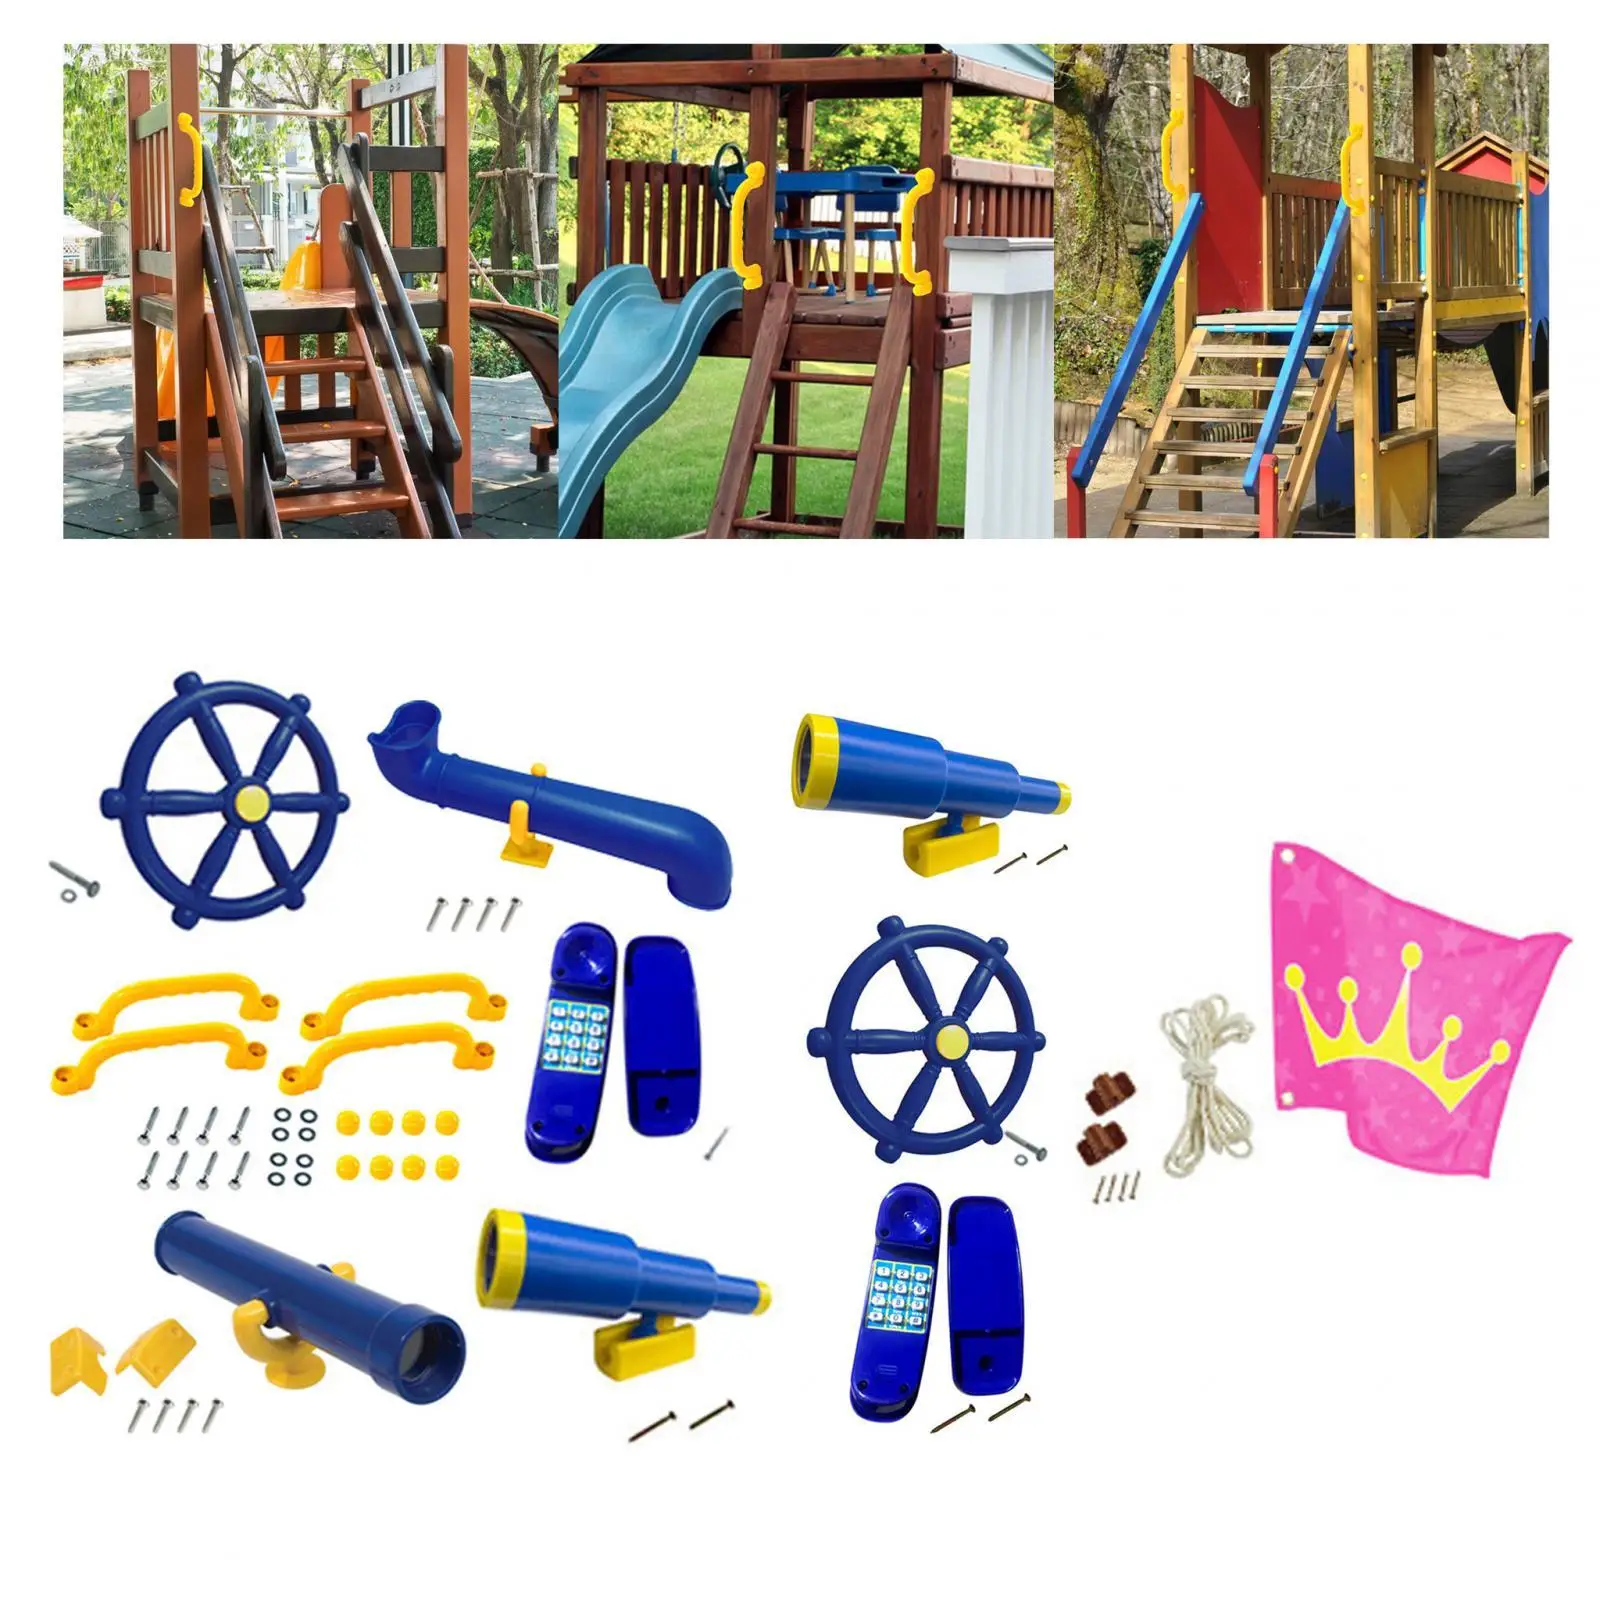 Playground Accessories Outdoor Games Toys Pirate Telescope Outdoor Playset for Backyard Jungle Gym Playhouse Tree House Children